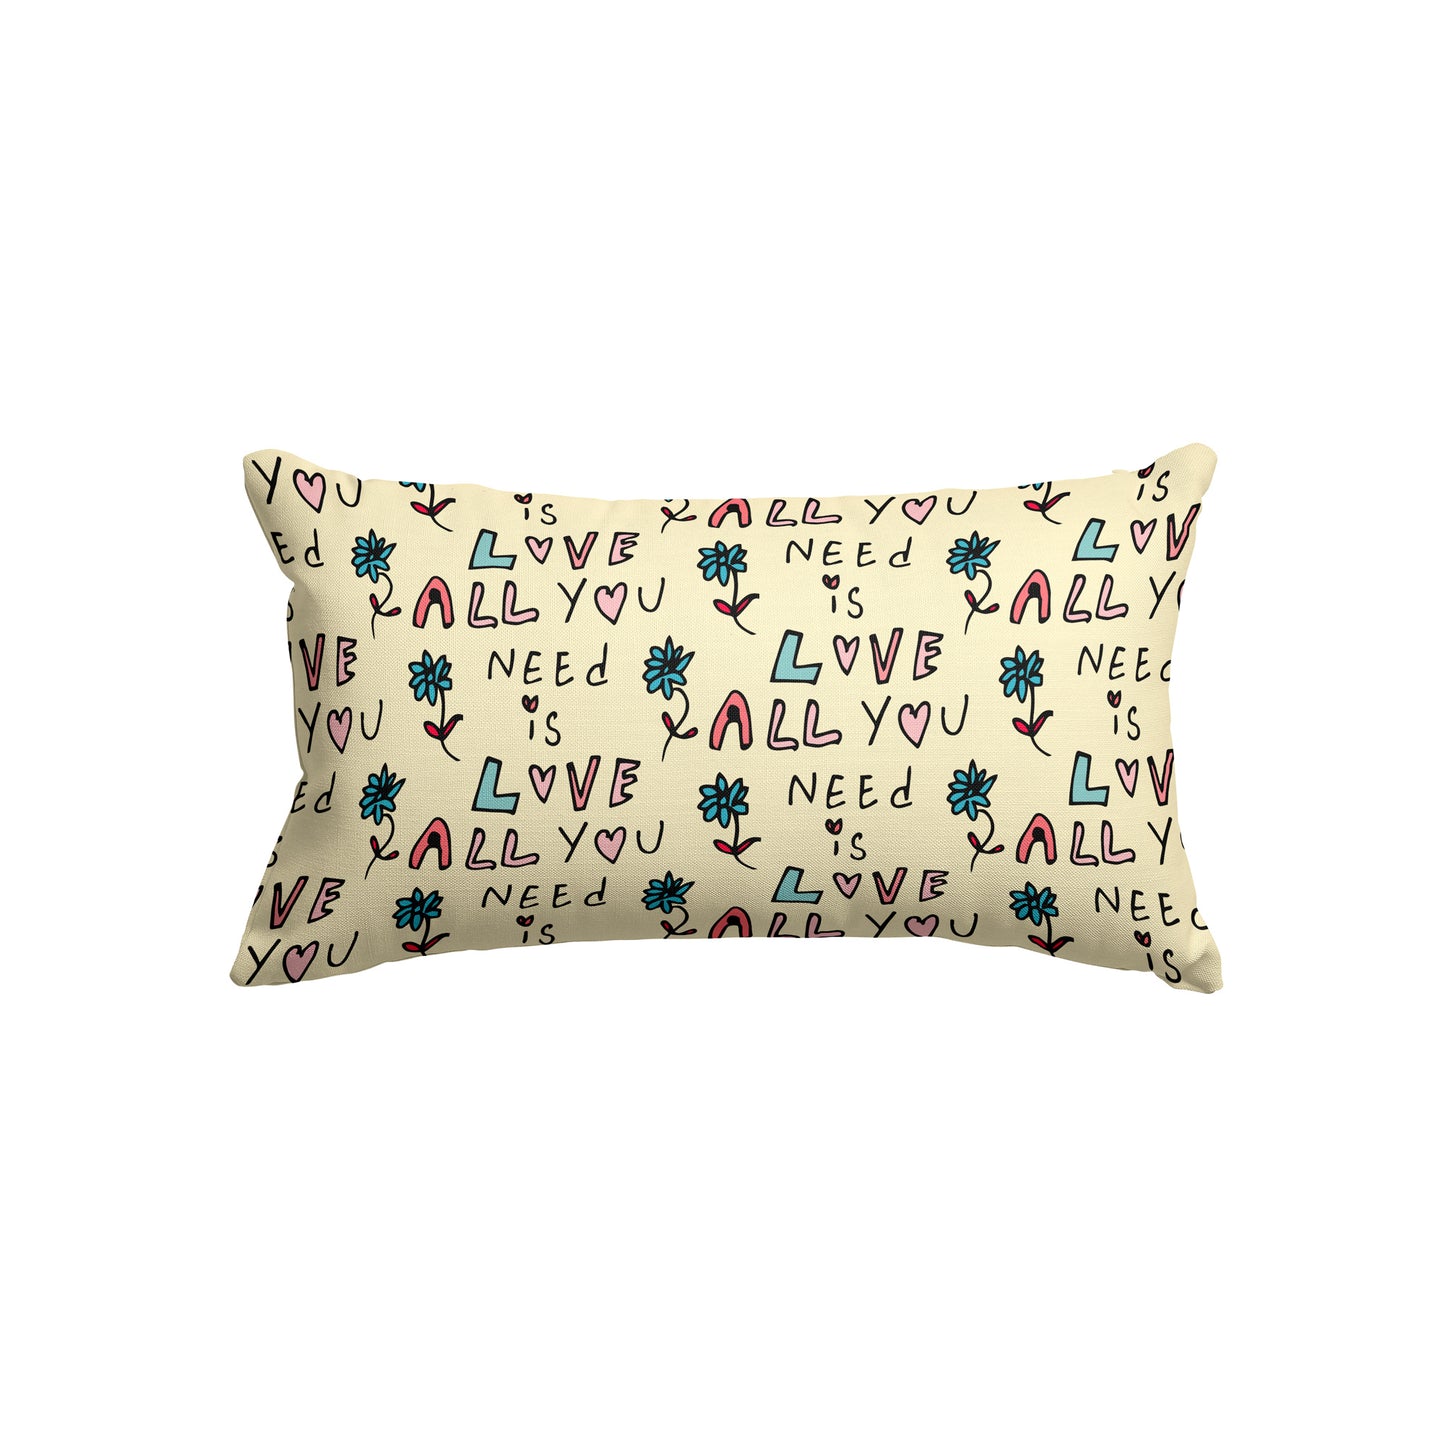 All you need is love - Rectangle Cushion